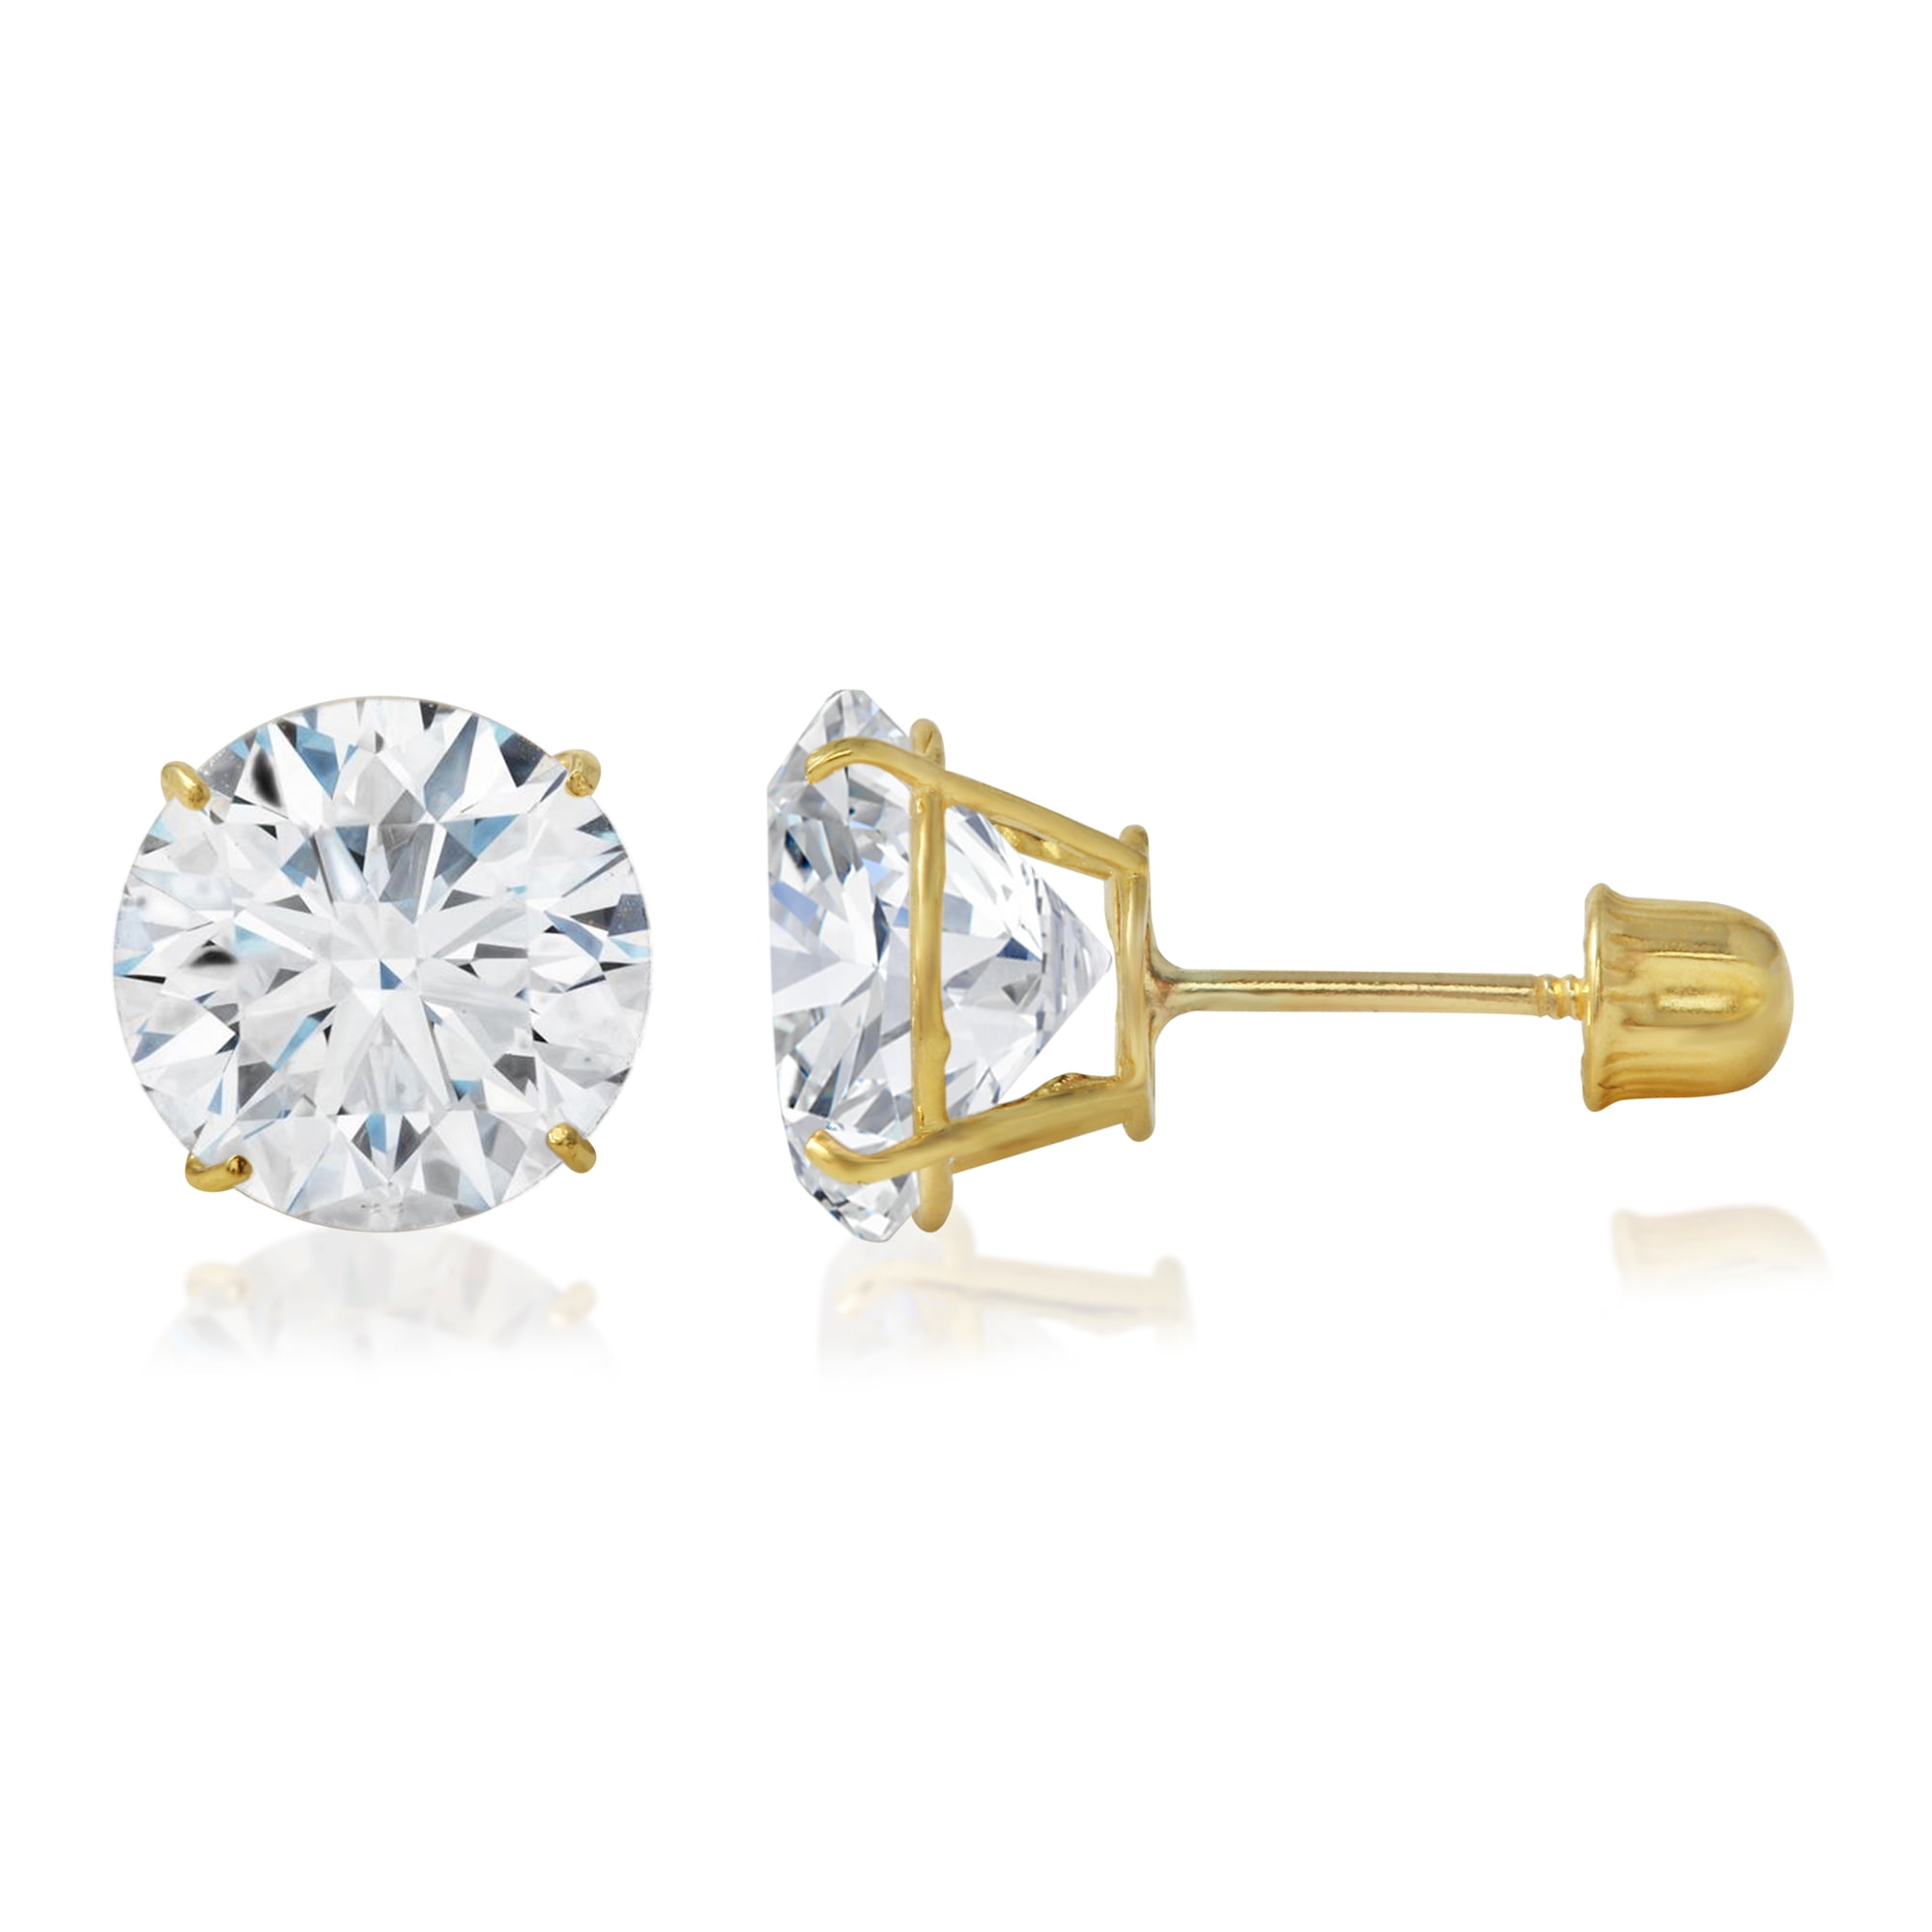 10mm Round Clear Cubic Zirconia Stud Earrings 14K Solid Yellow Gold 2mm 